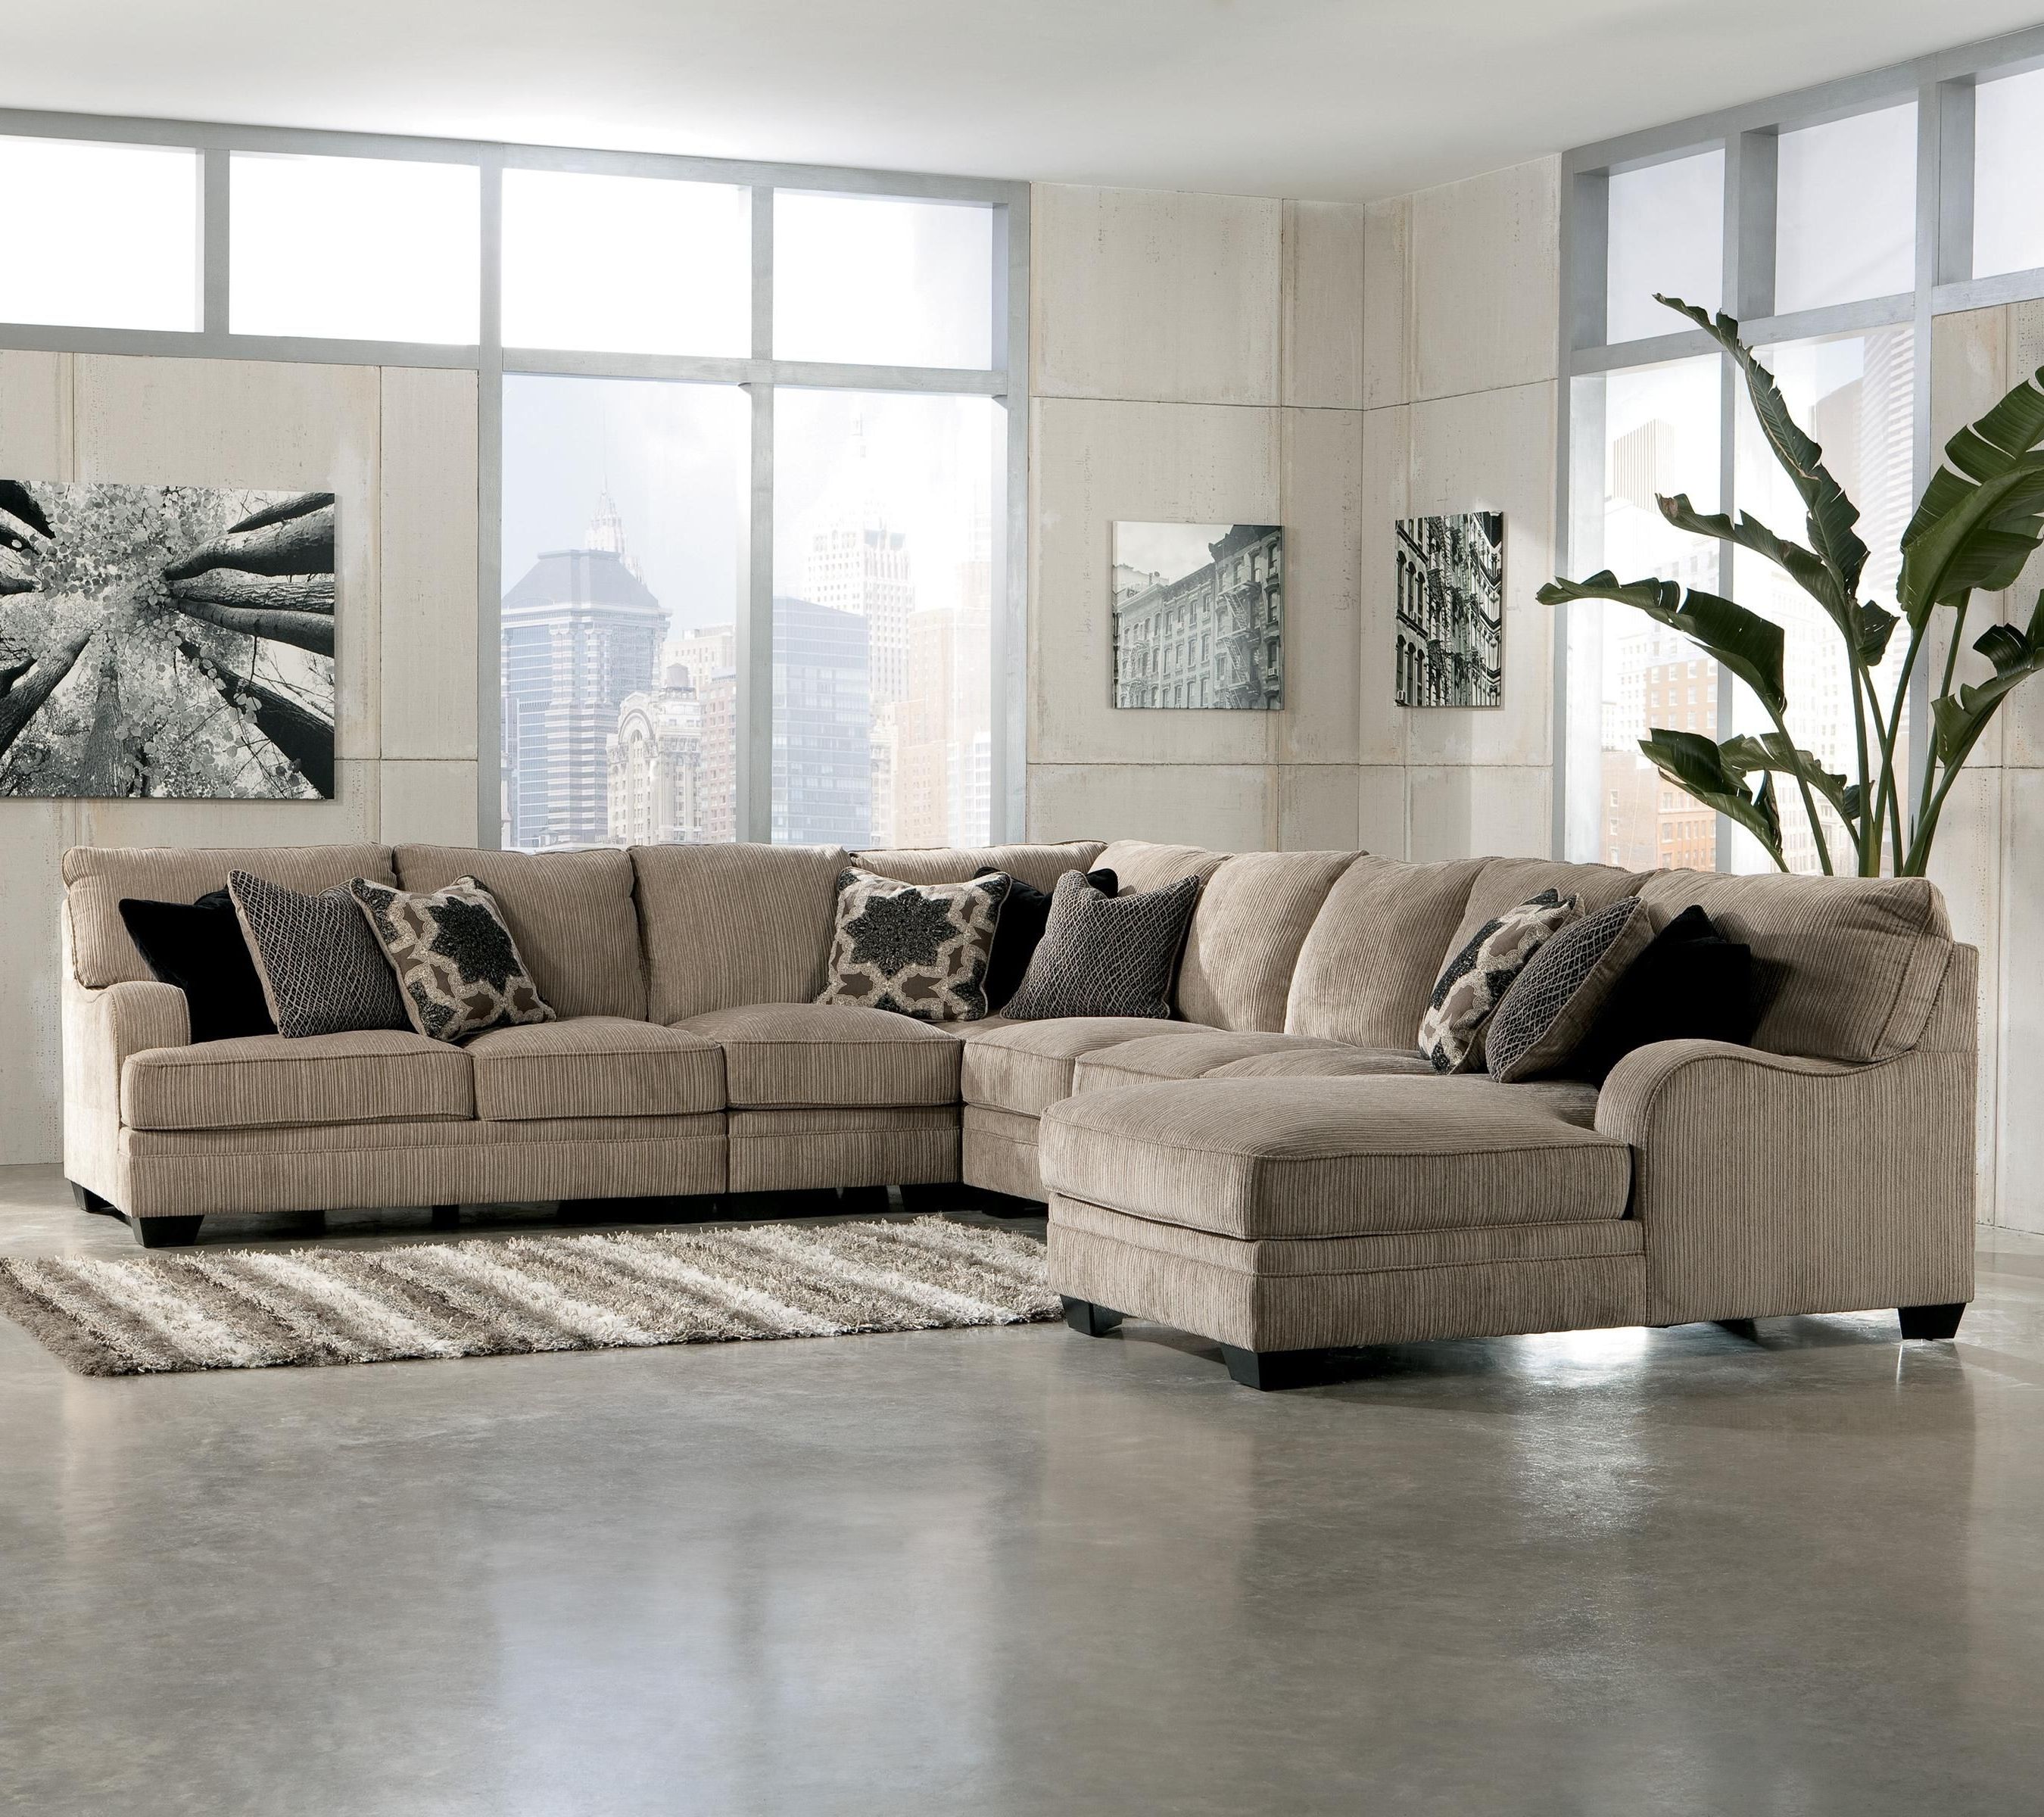 Living Room Sectional: Katisha 4 Piece Sectionalashley Pertaining To Recent Jackson Ms Sectional Sofas (View 1 of 20)